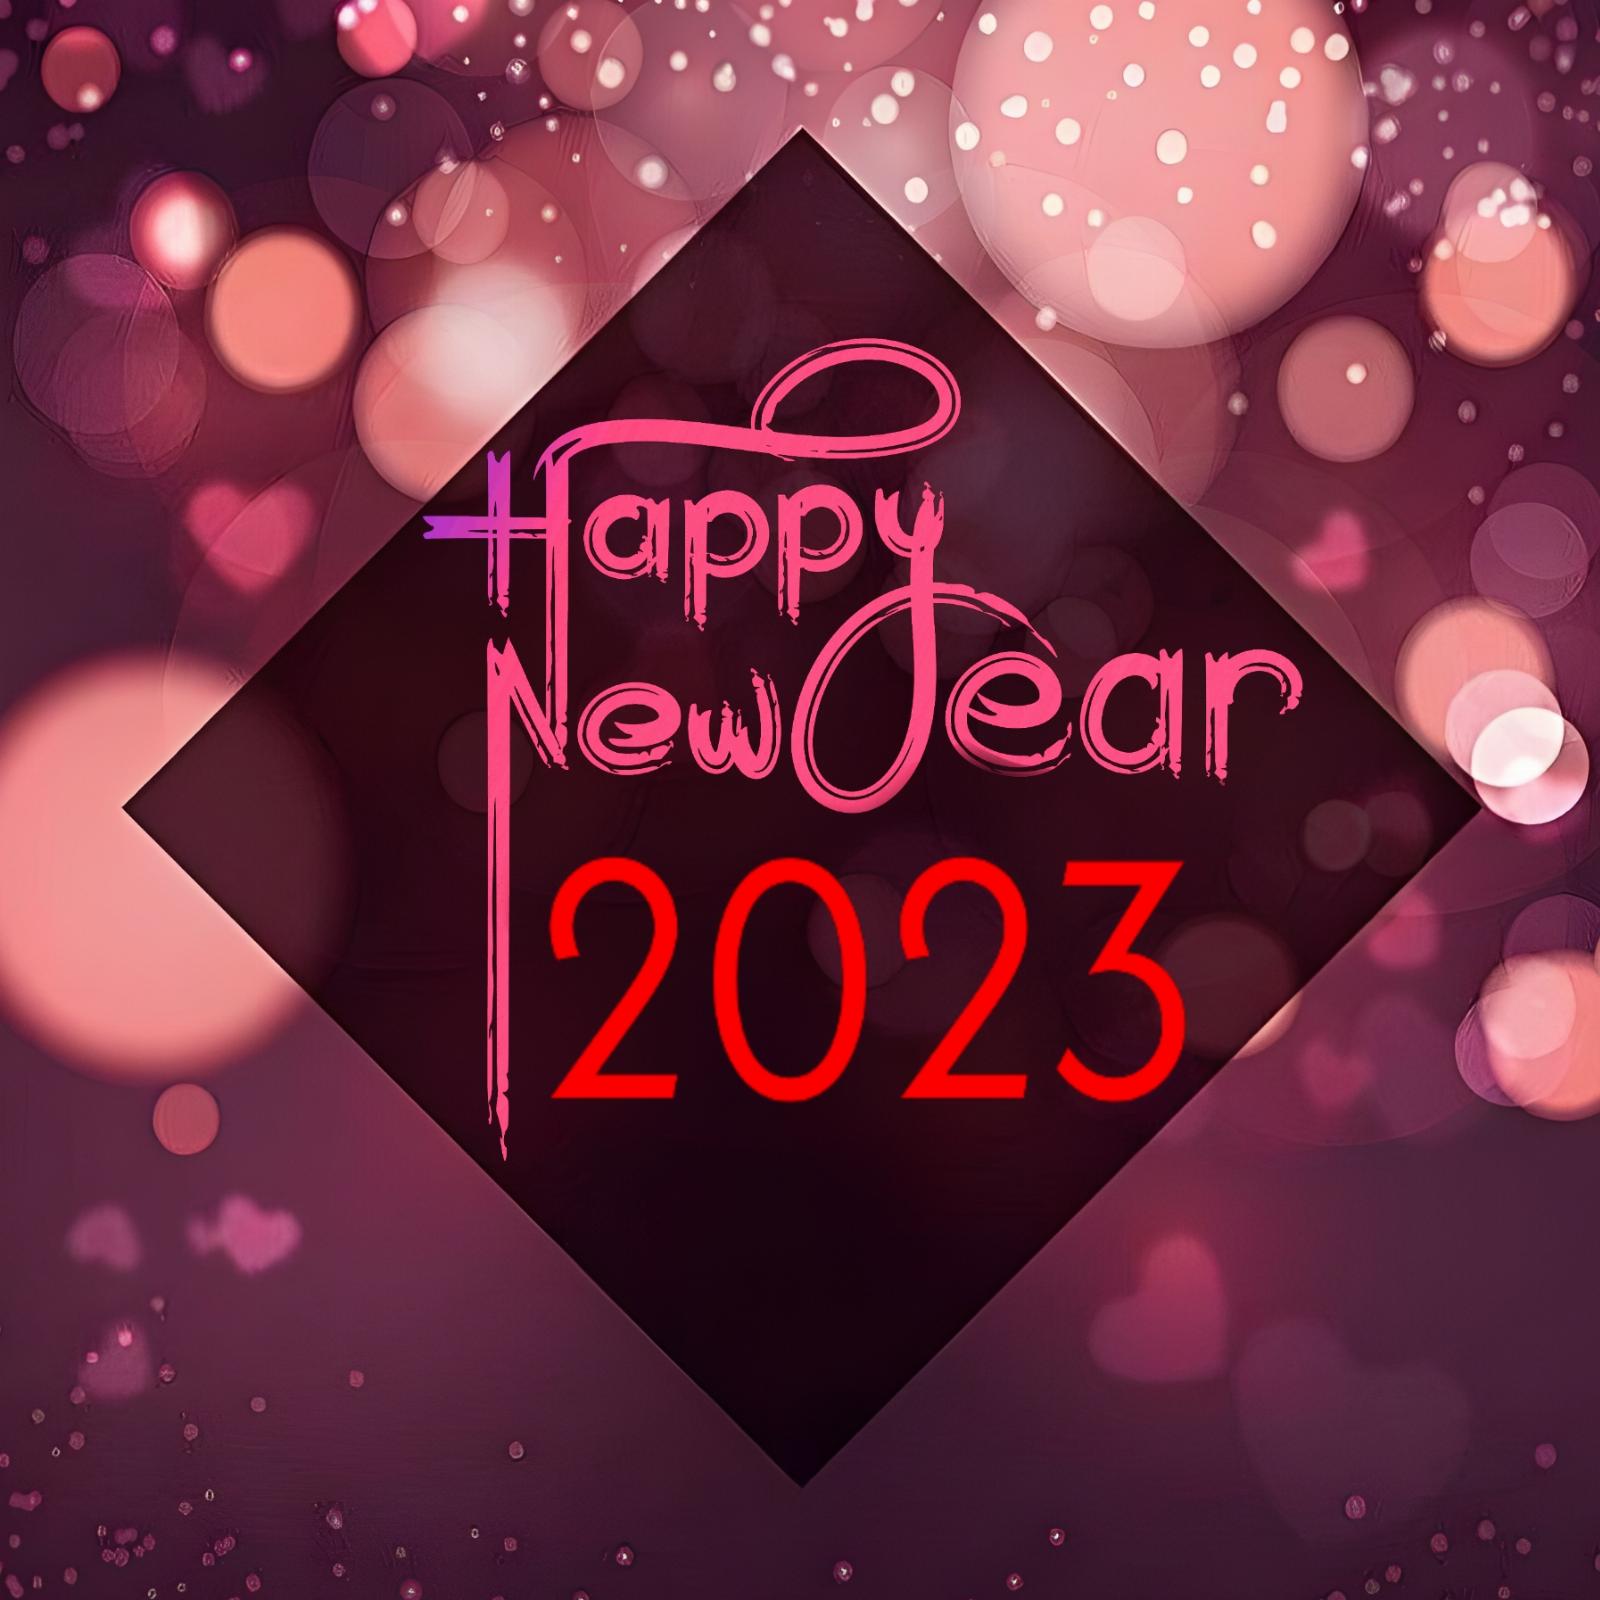 New Year 2023 Images